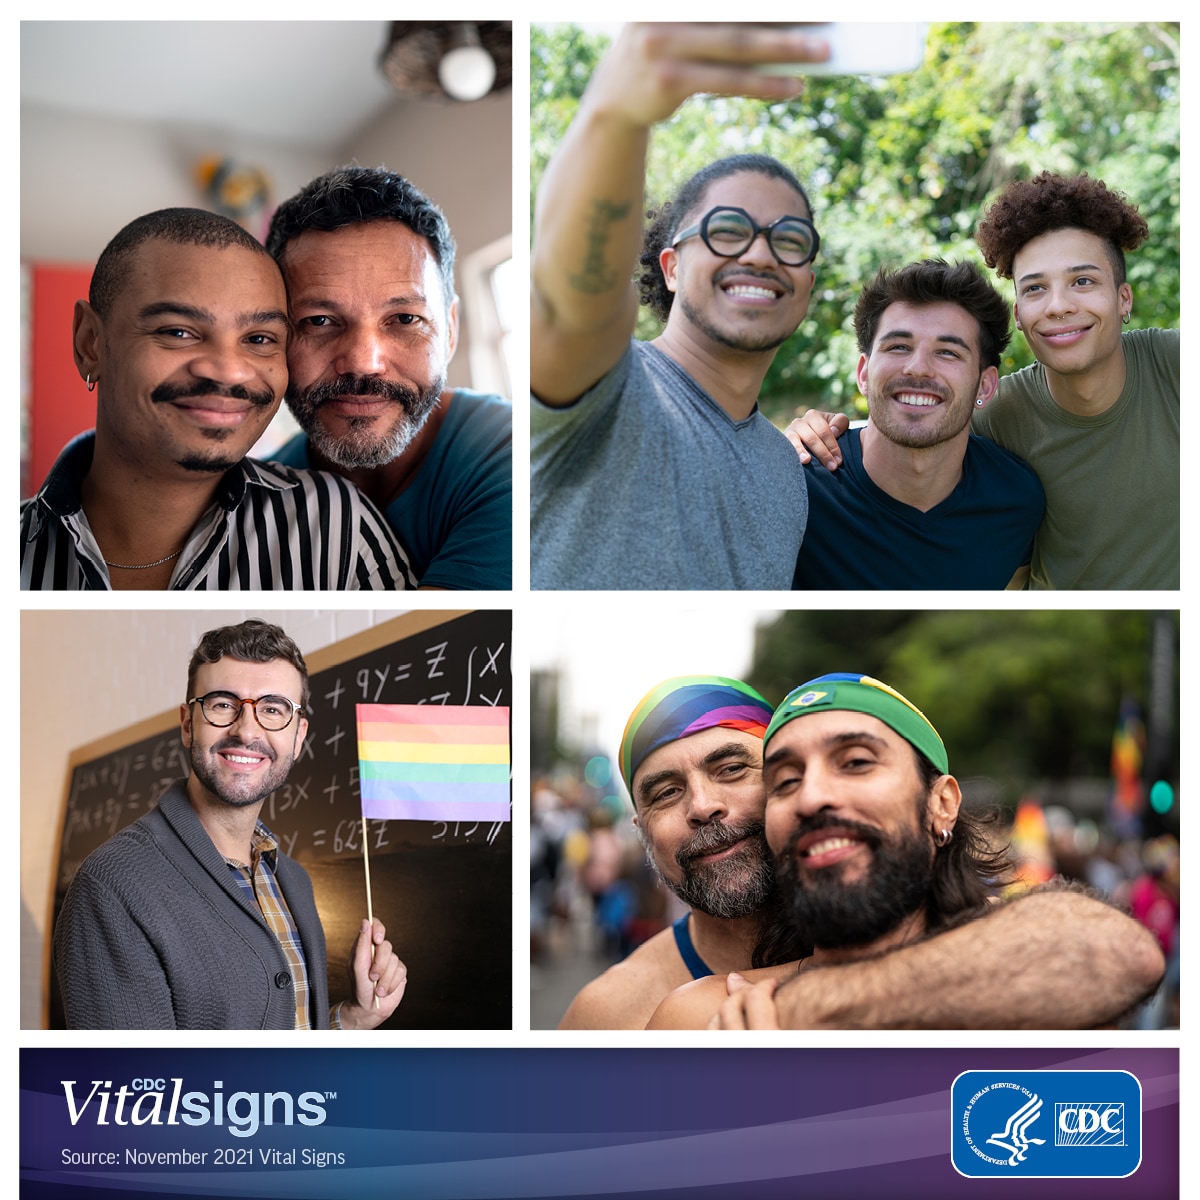 Photo collage of a man holding a rainbow flag, two couples, and three friends